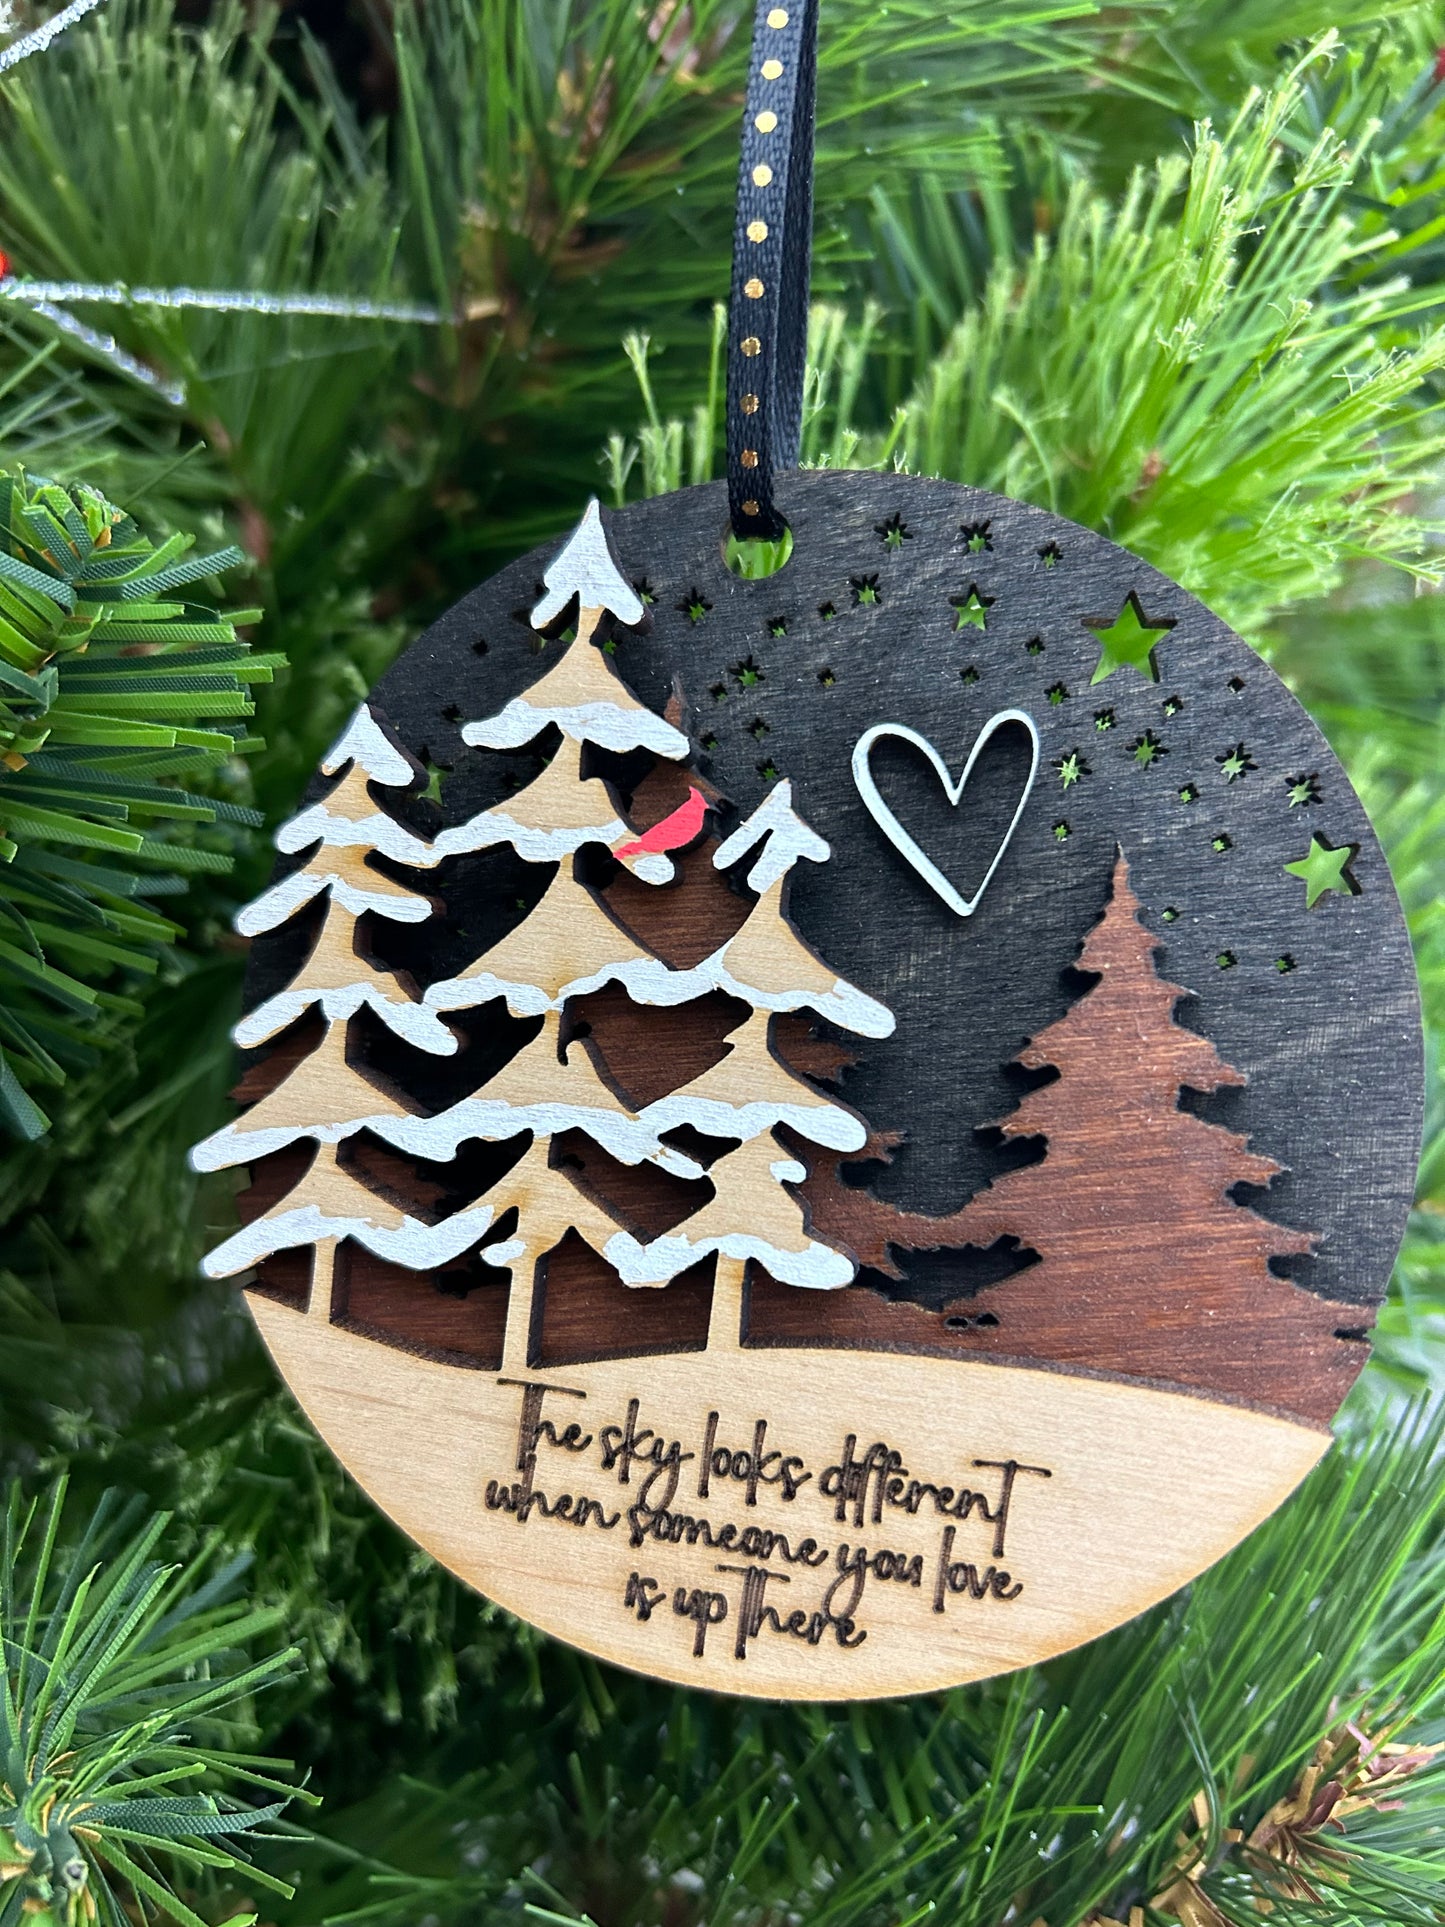 Personalized Memorial Ornament | Laser Engraved Wood Ornament | The Sky Looks Different | Christmas Keepsake Ornament | Holiday Gift